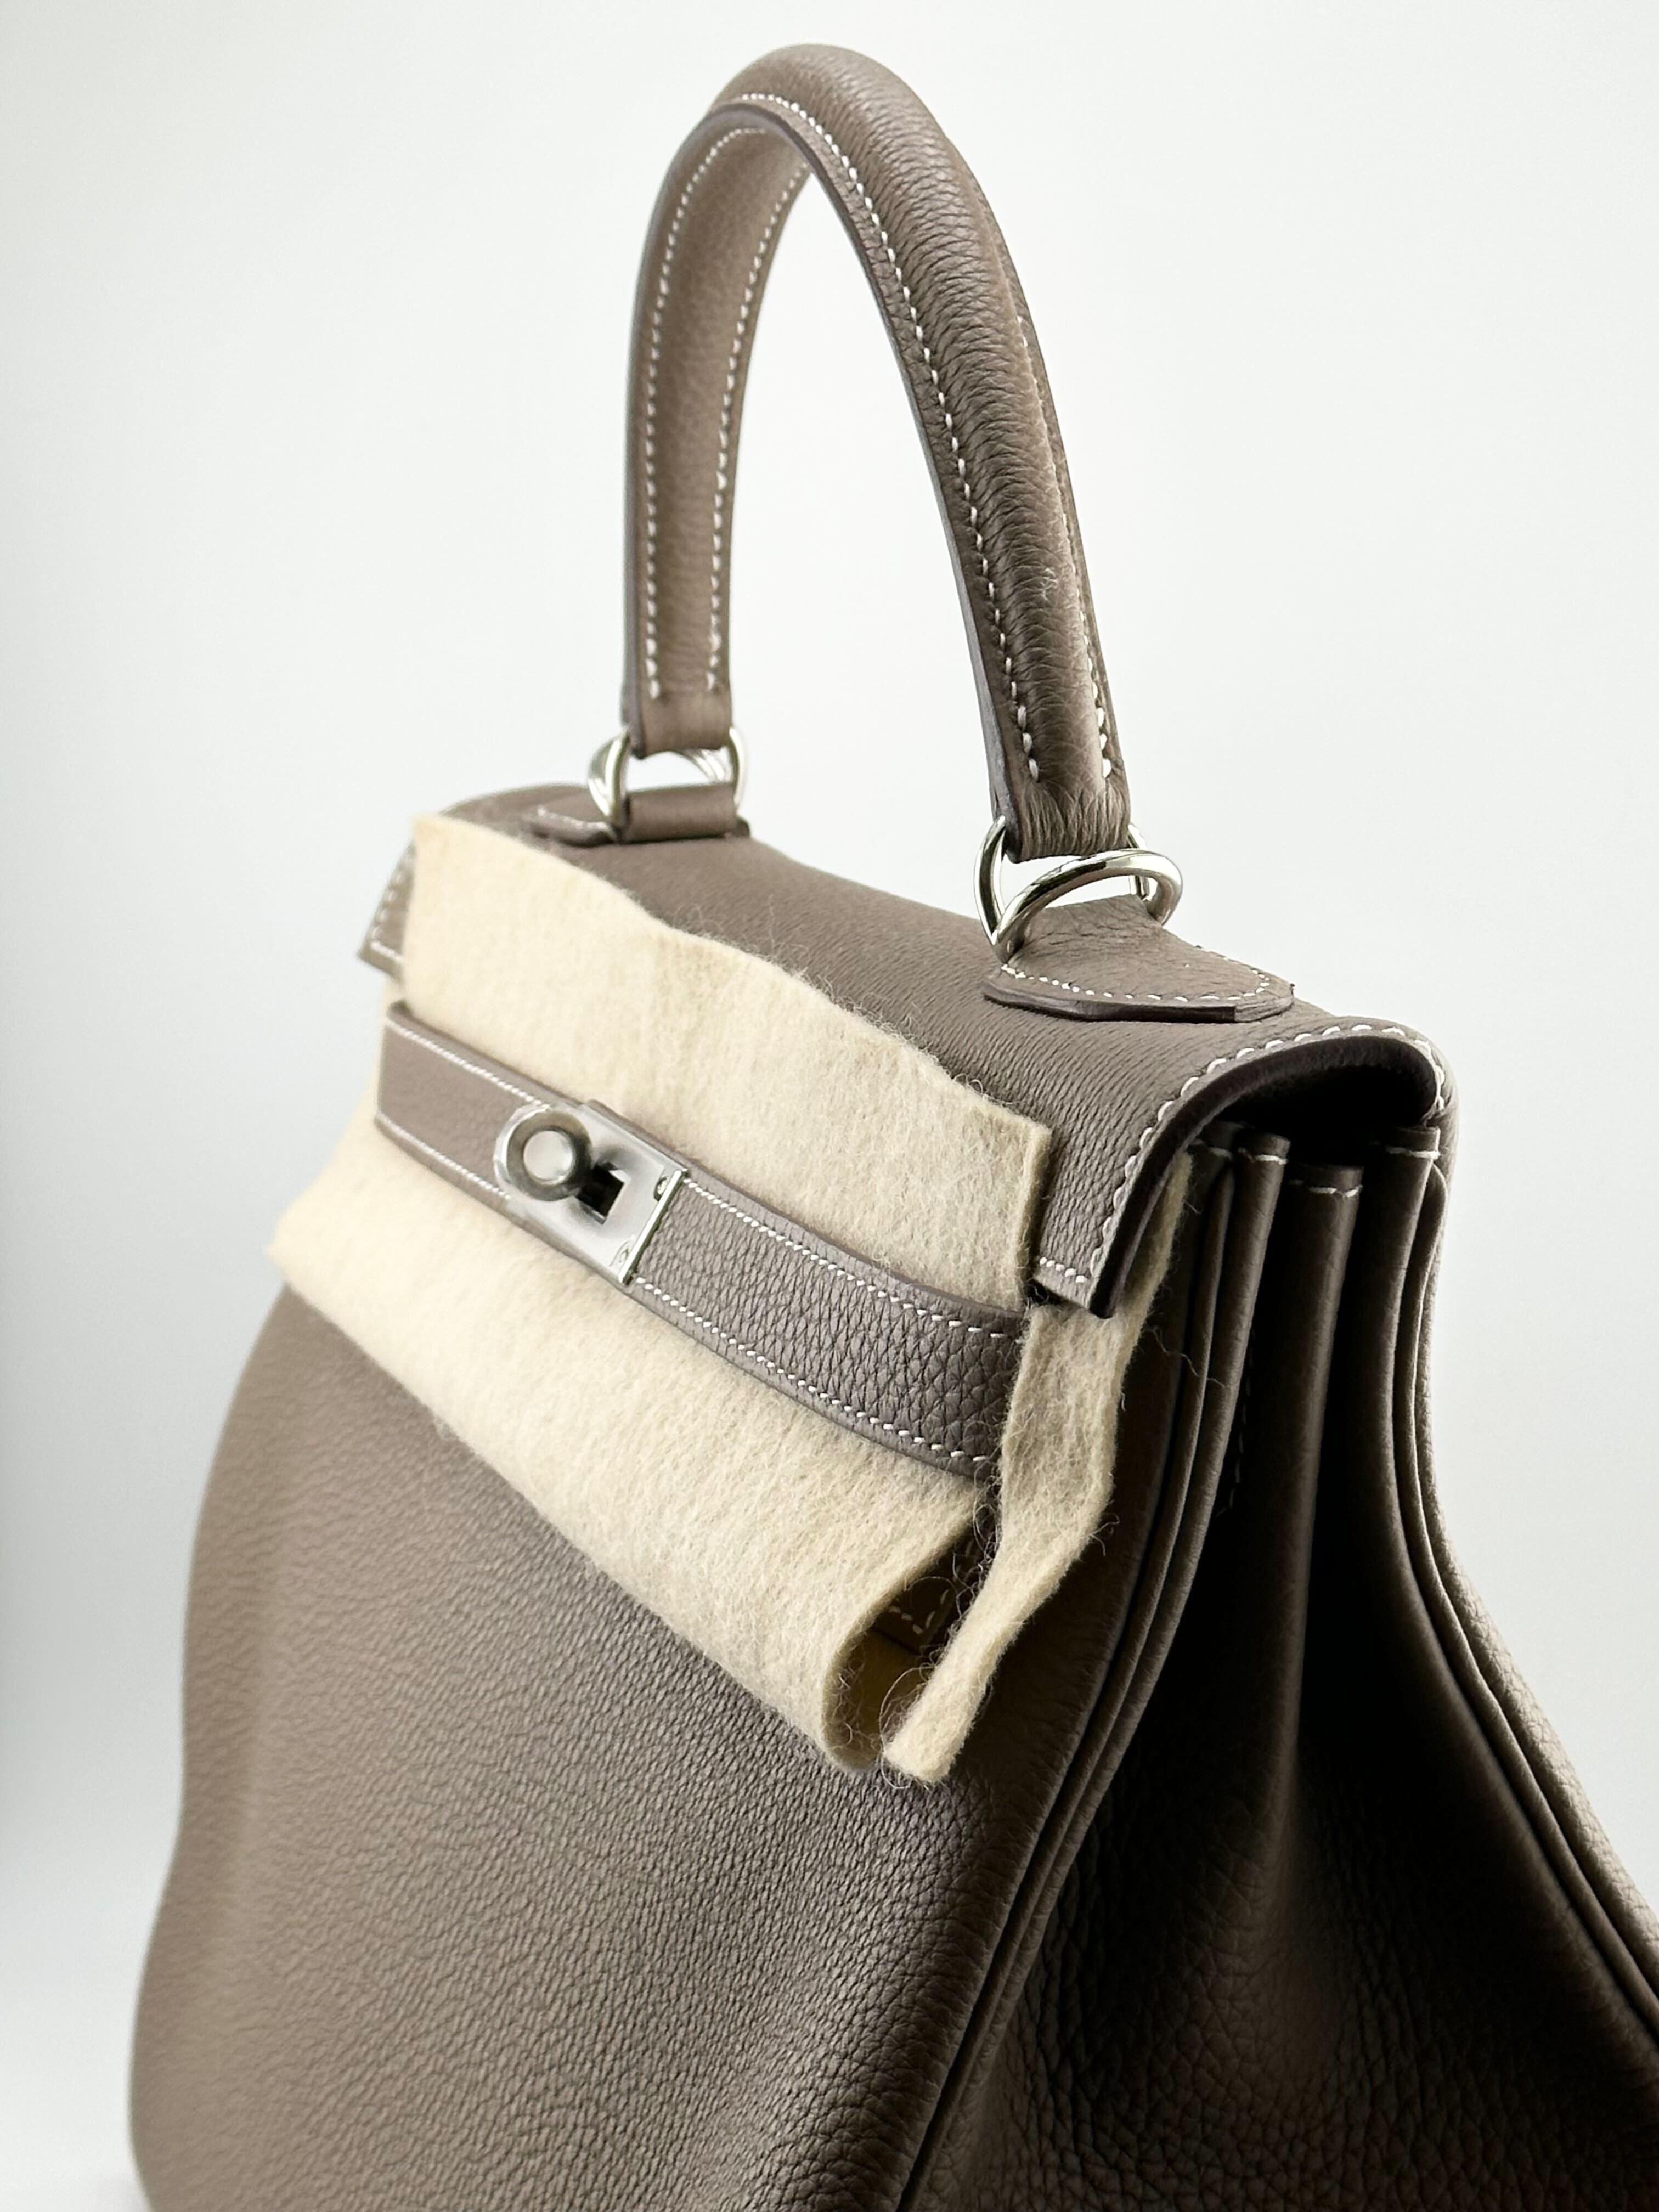 Hermes Kelly II Retourne 32 Togo Etoupe Palladium Hardware In New Condition For Sale In New York, NY